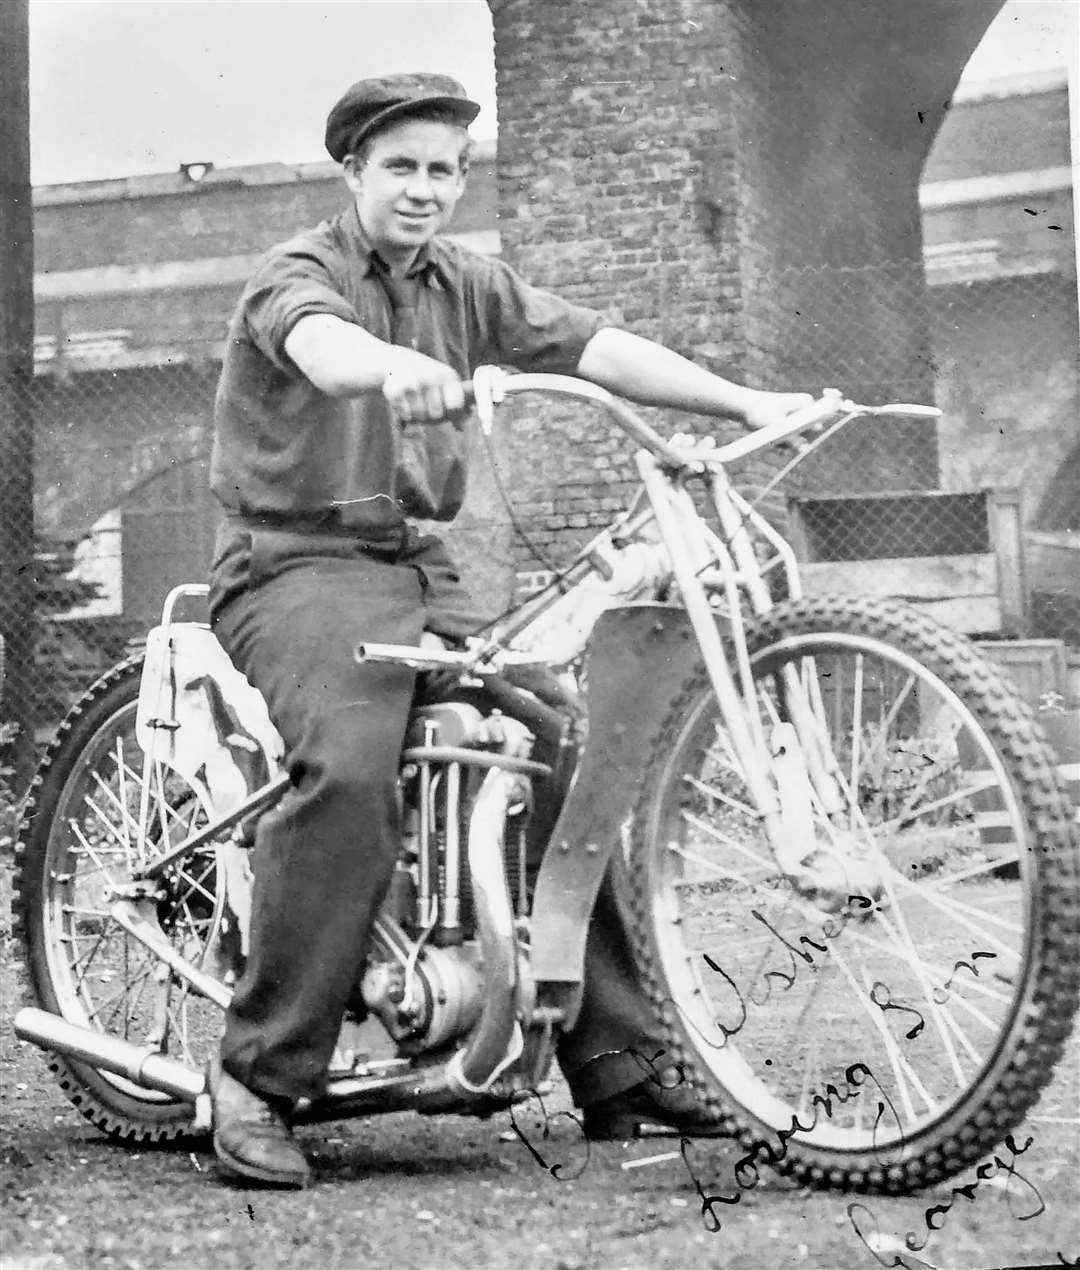 Sheppey entertainer George 'Georgie Dee' Dickson as a young speedway rider